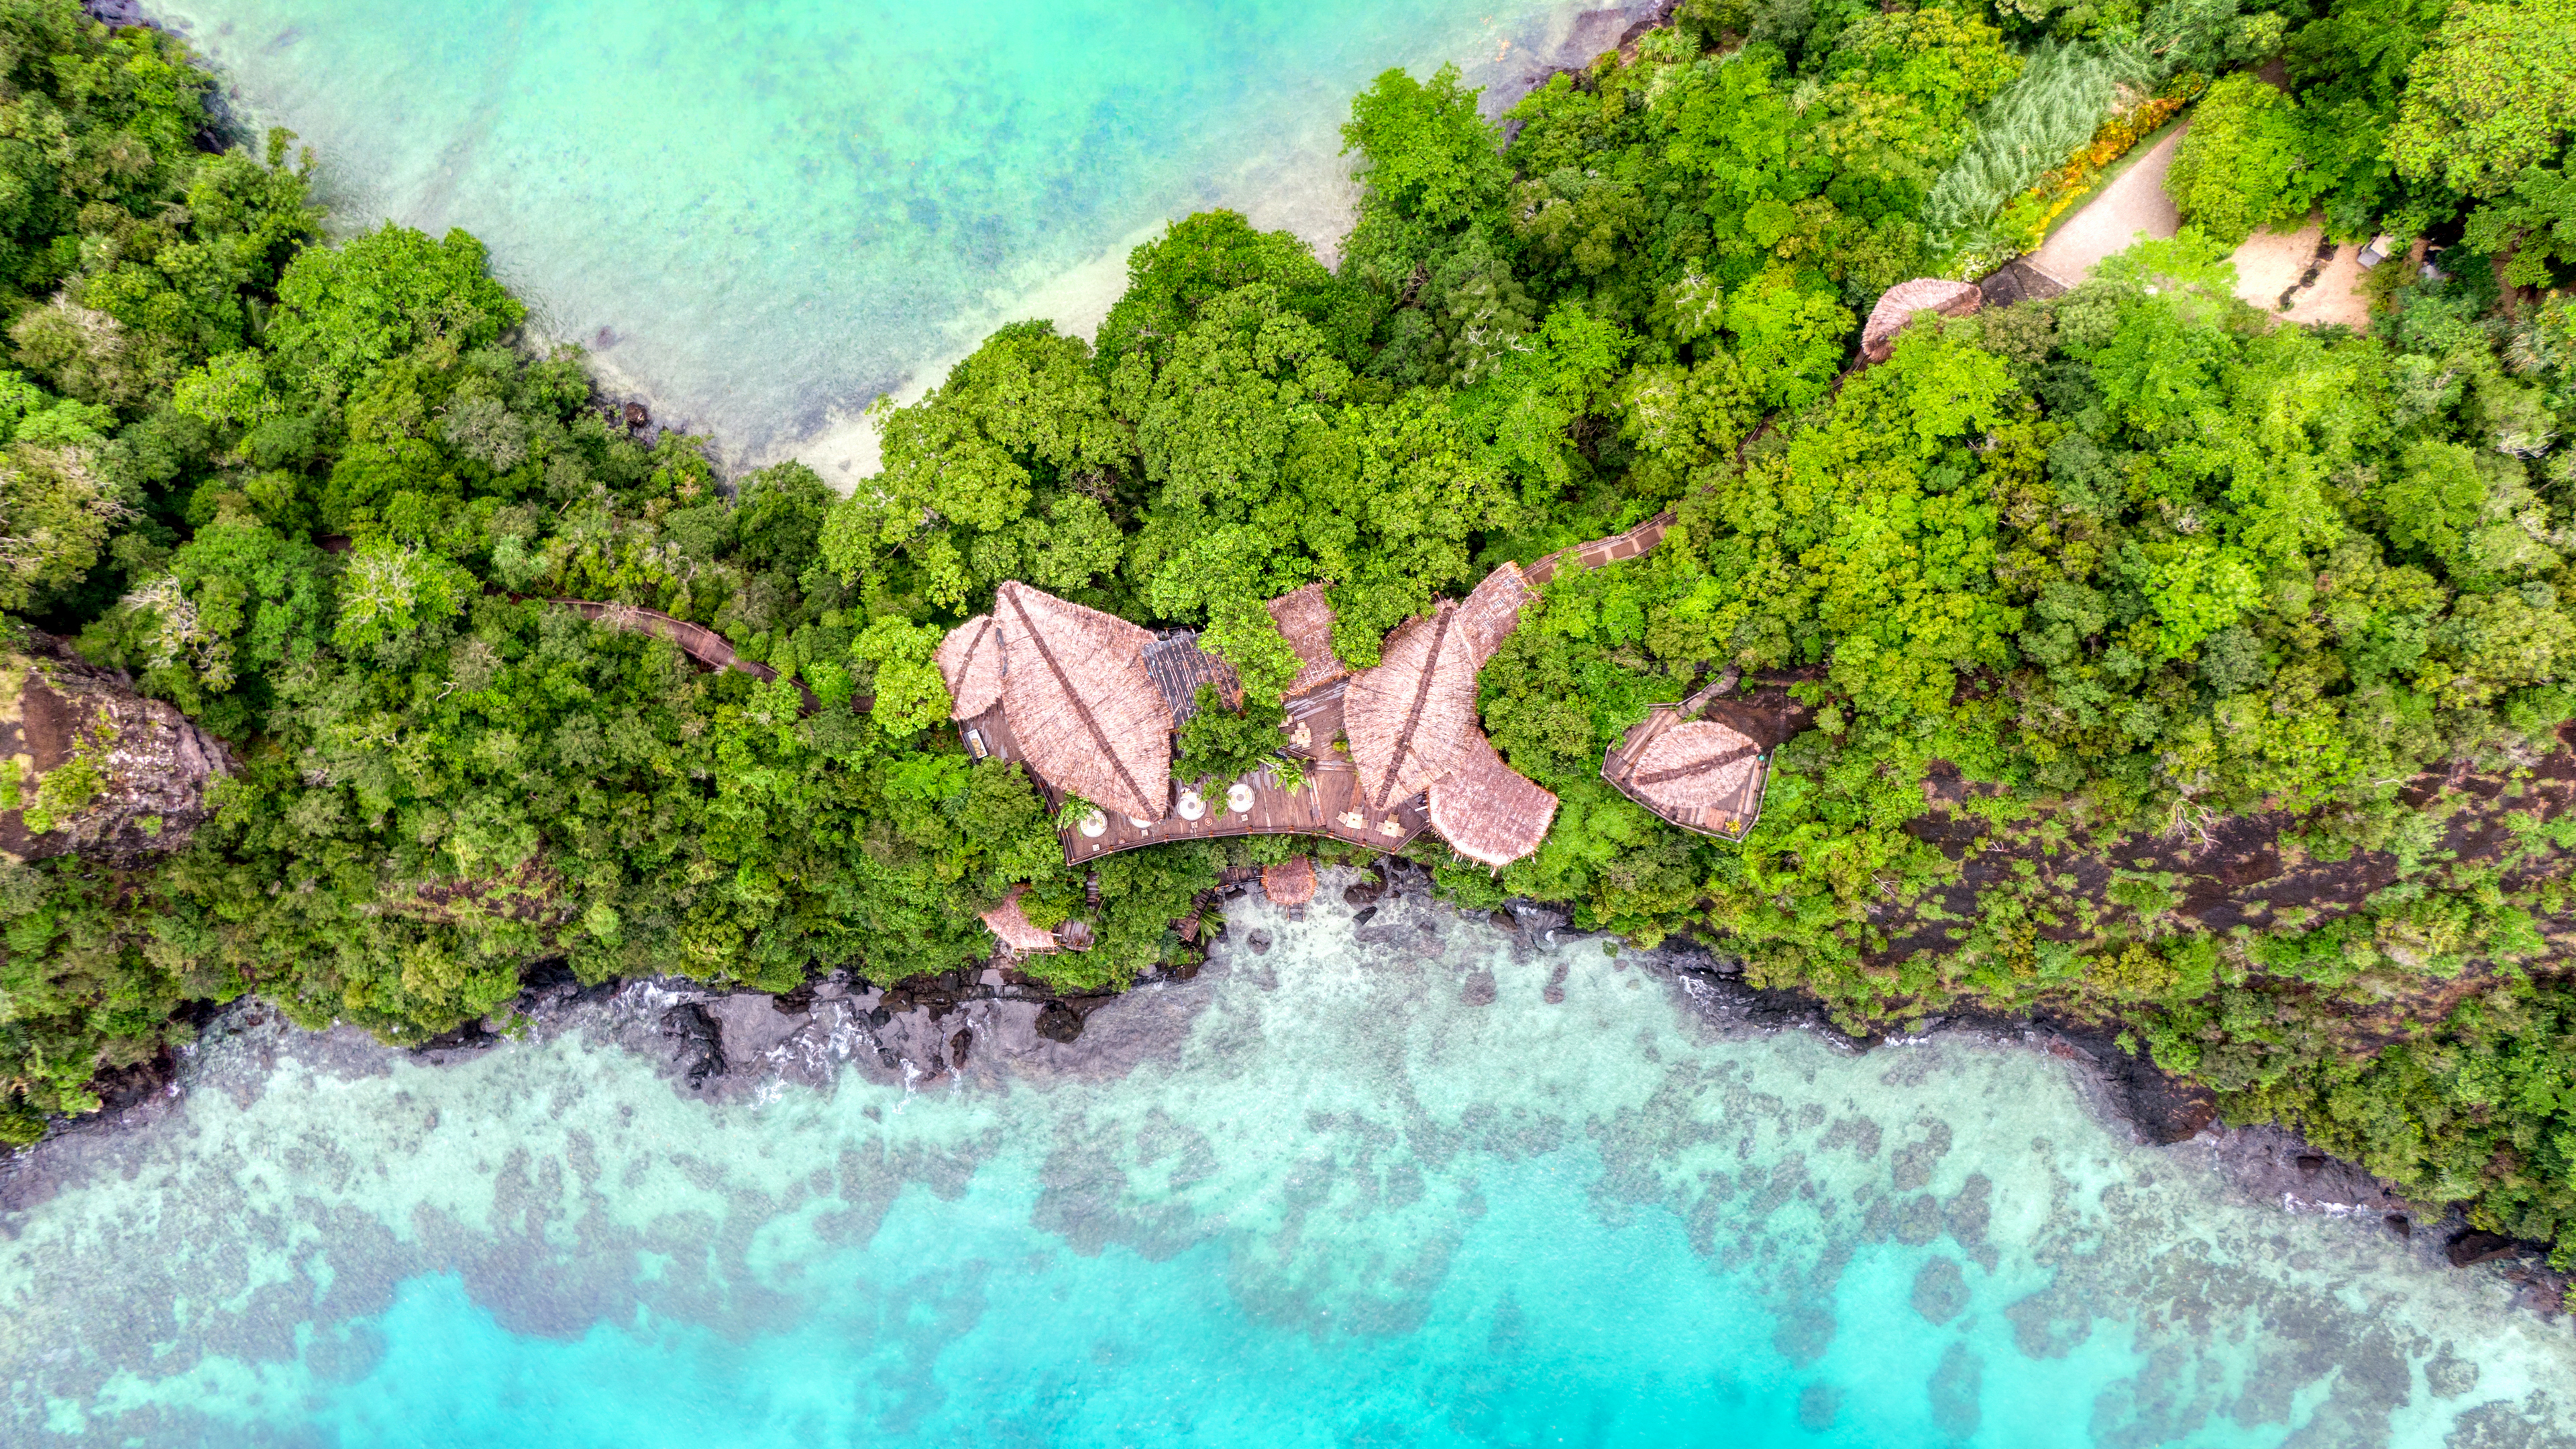 General 3840x2160 photography landscape aerial view trees outdoors forest water bungalow shore bay resort plants Fiji top view 4K